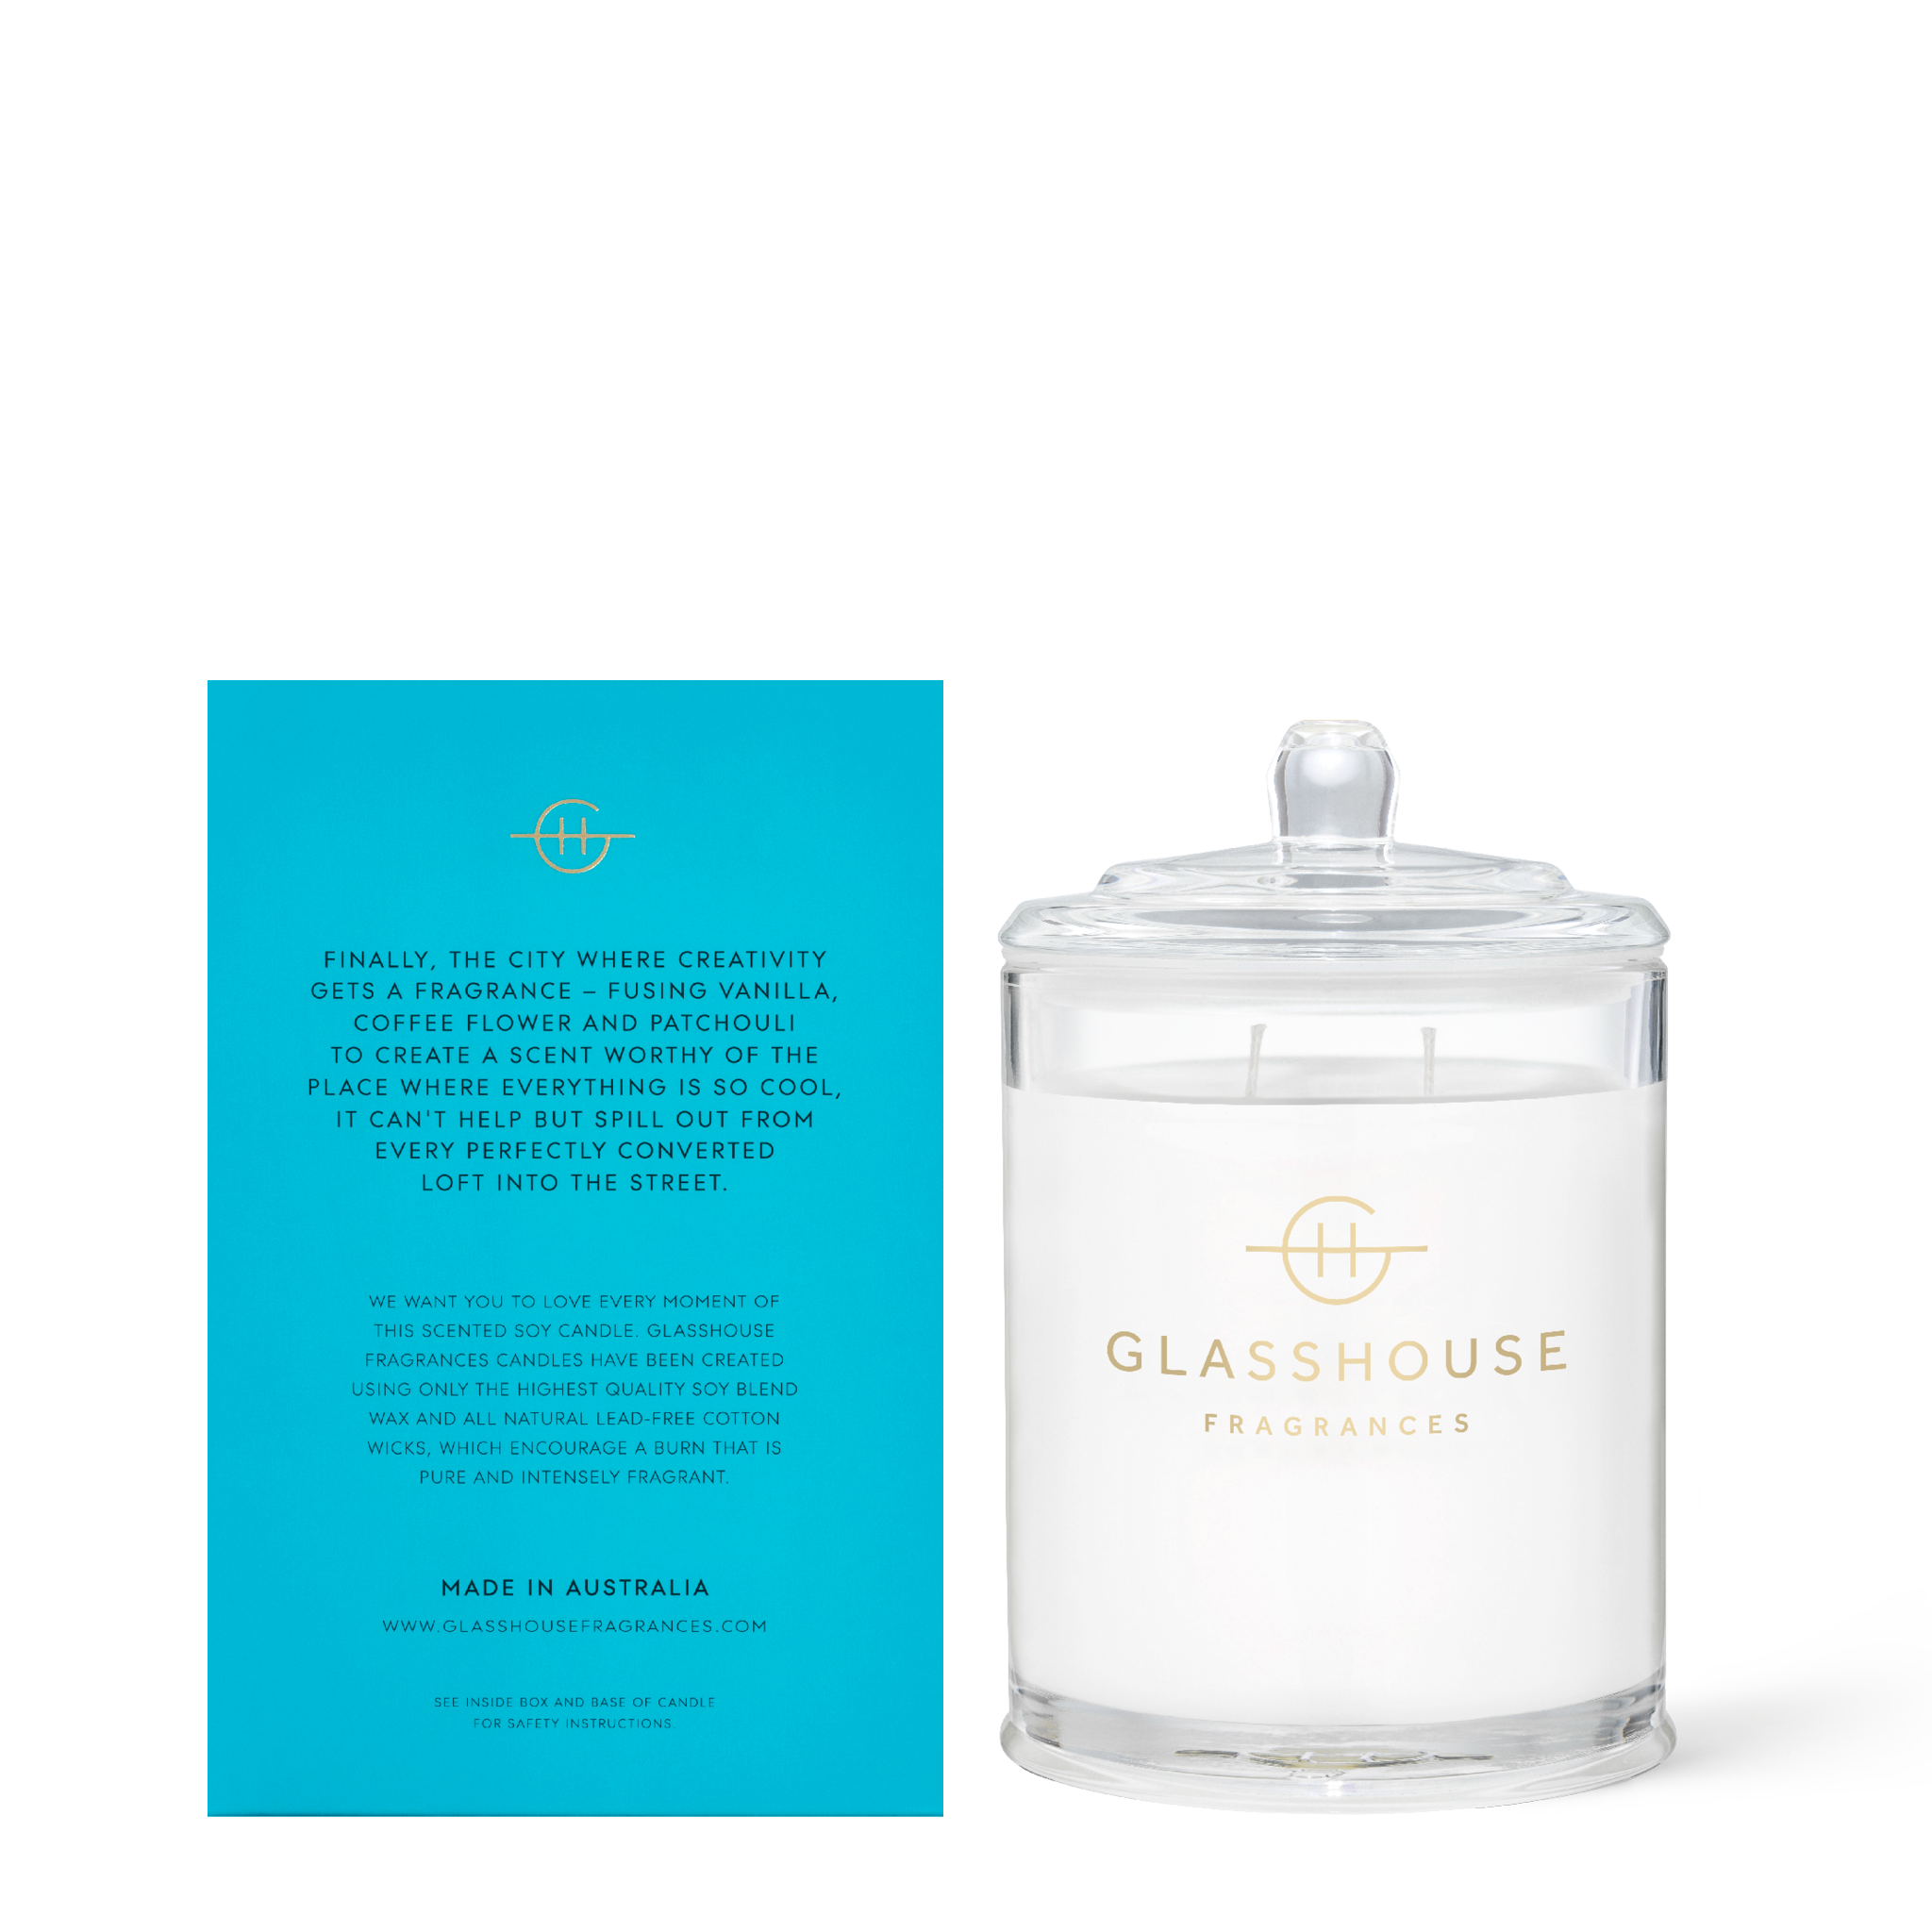 Glasshouse Fragrances Melbourne Muse Coffee Flower and Vanilla 380g Soy Candle with box - back of product shot